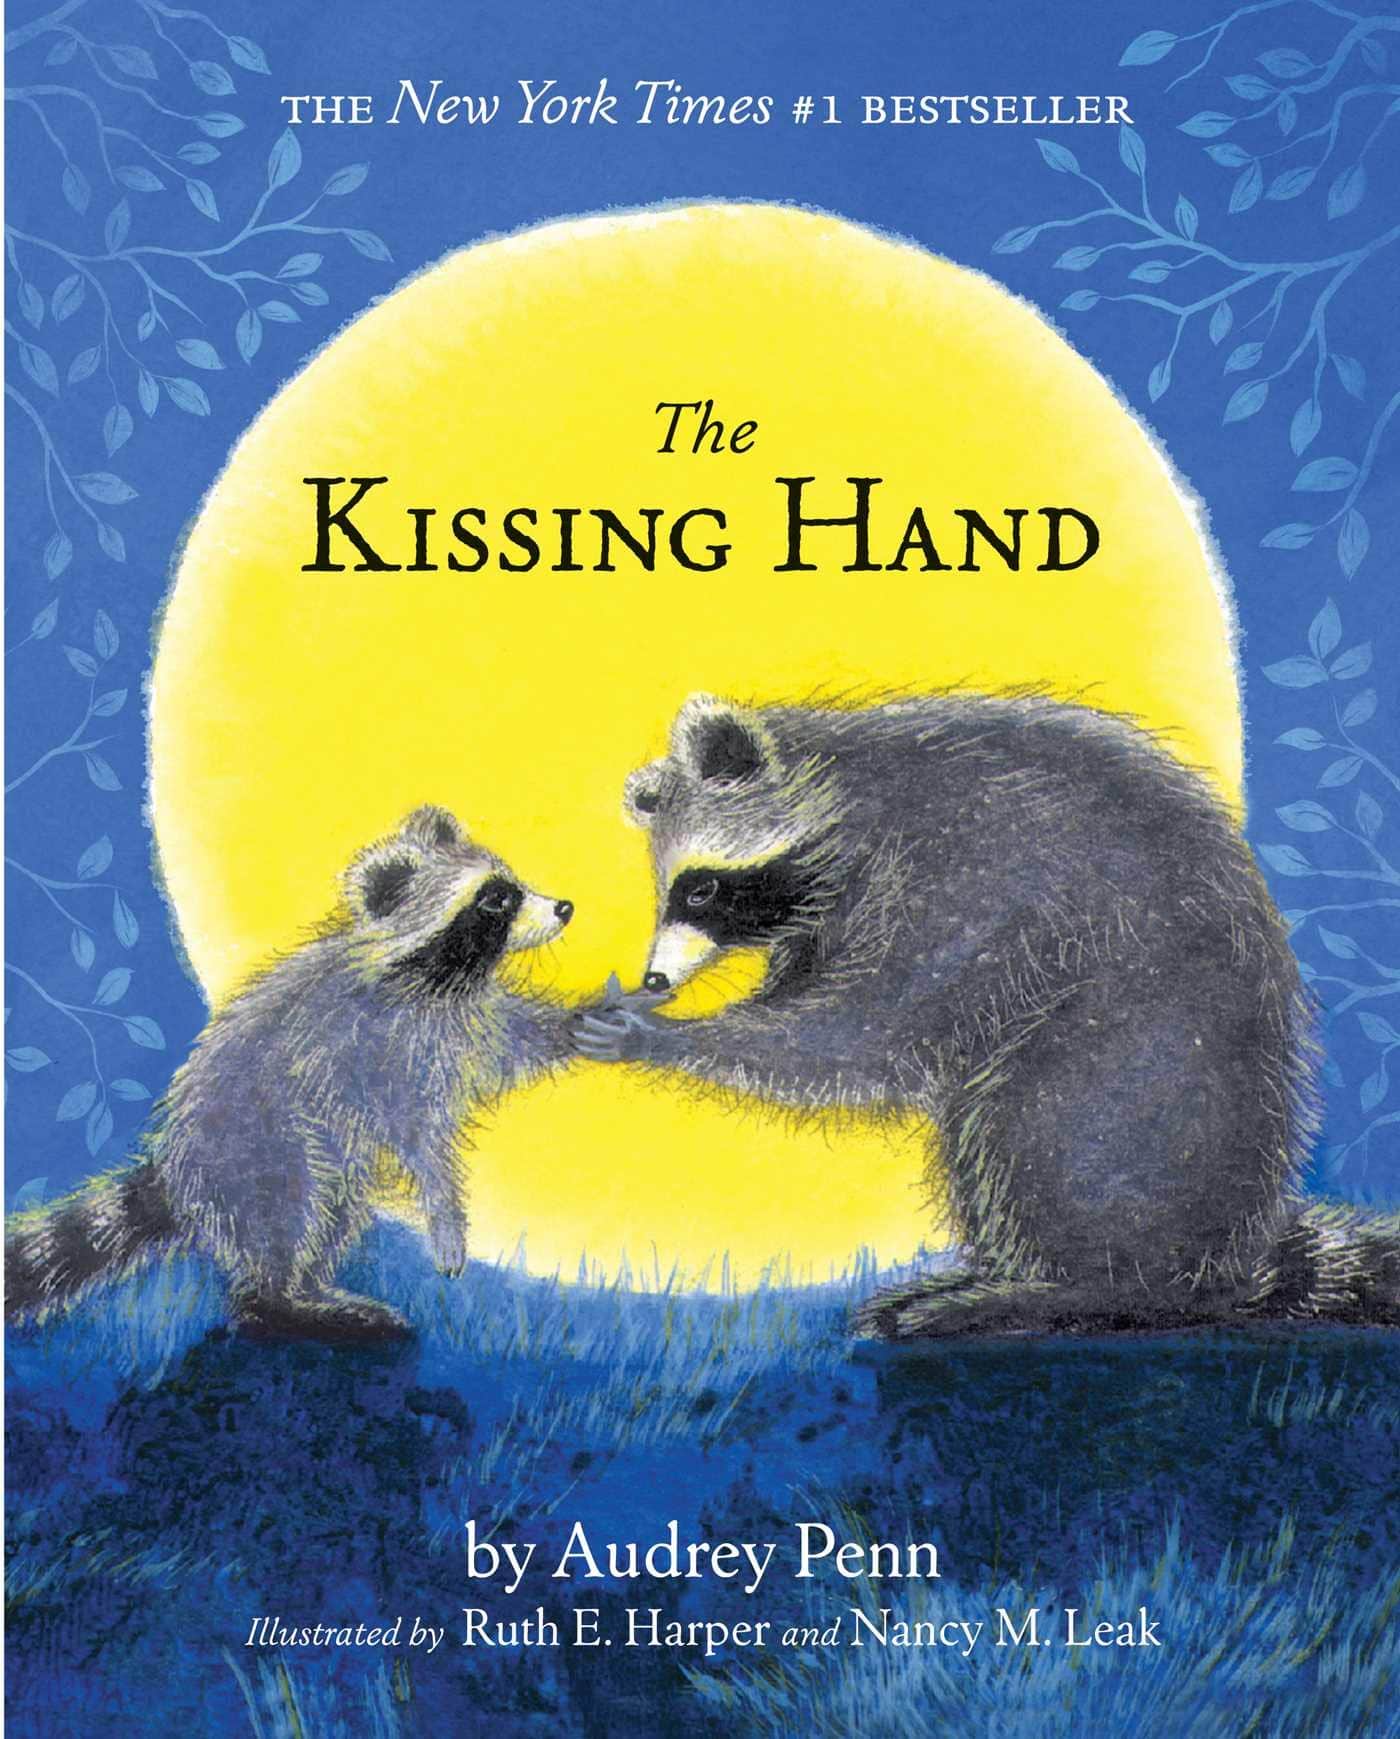 "The Kissing Hand" by Audrey Penn